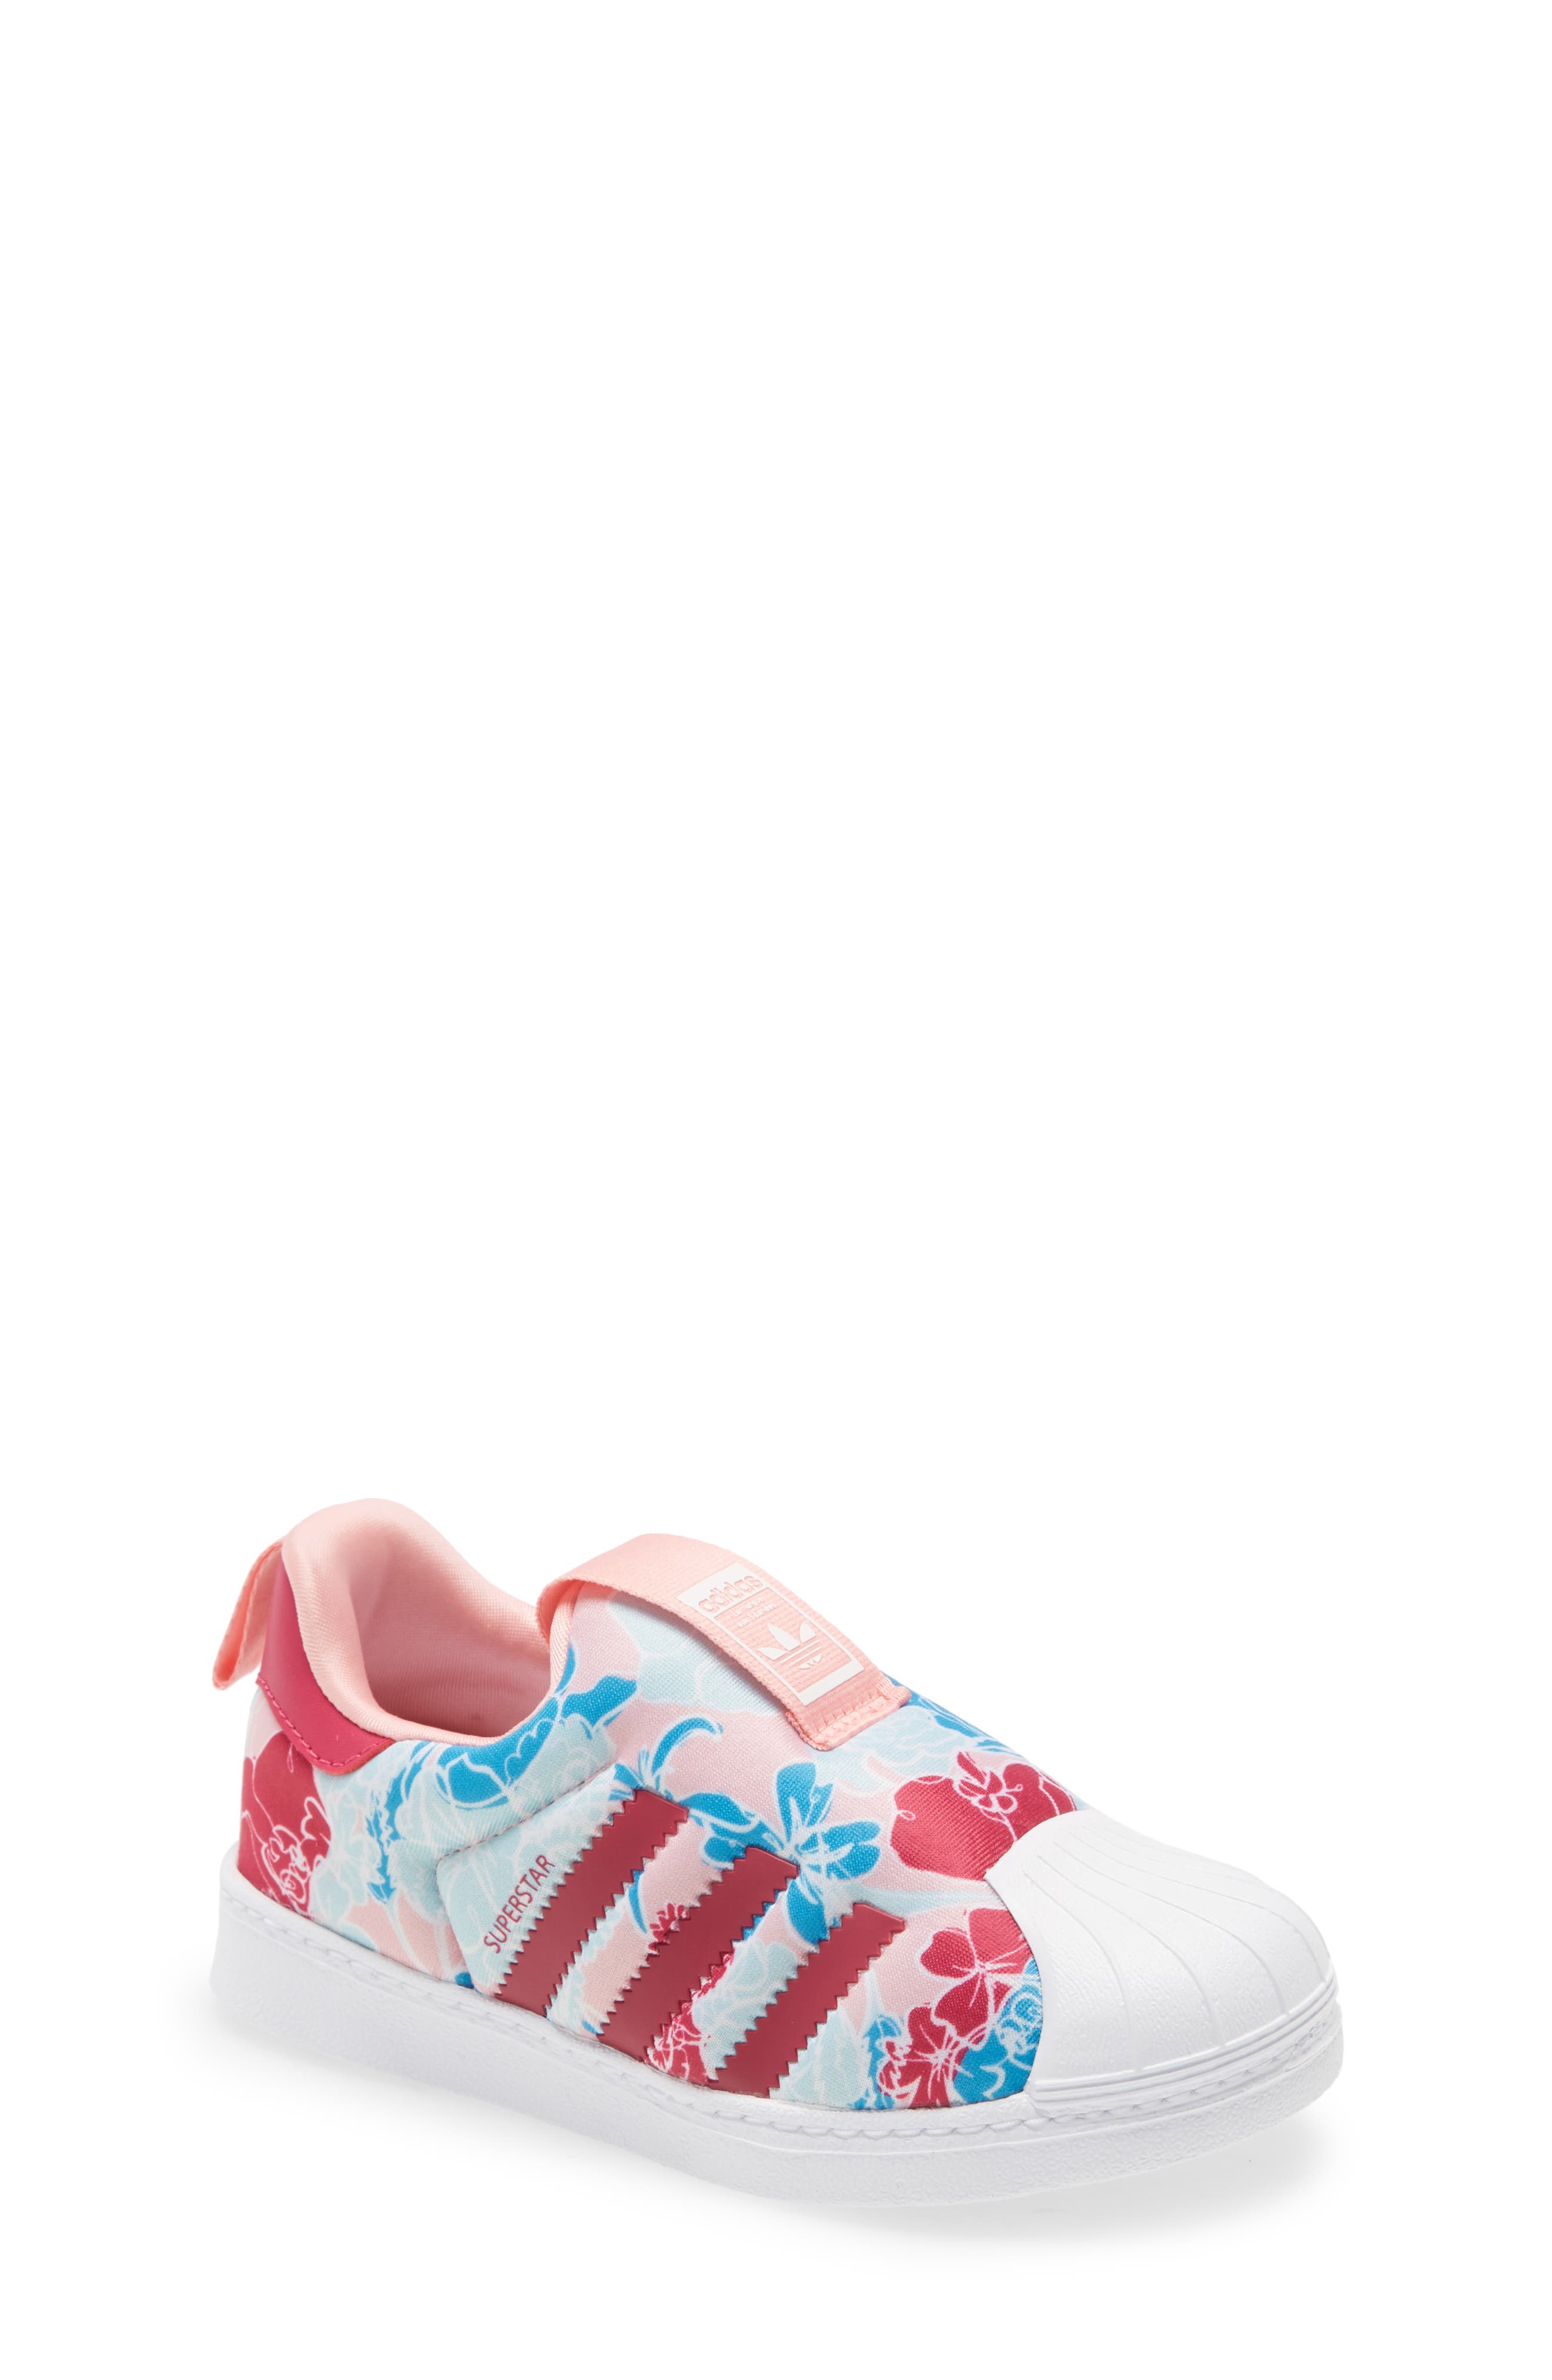 baby girl pink adidas shoes